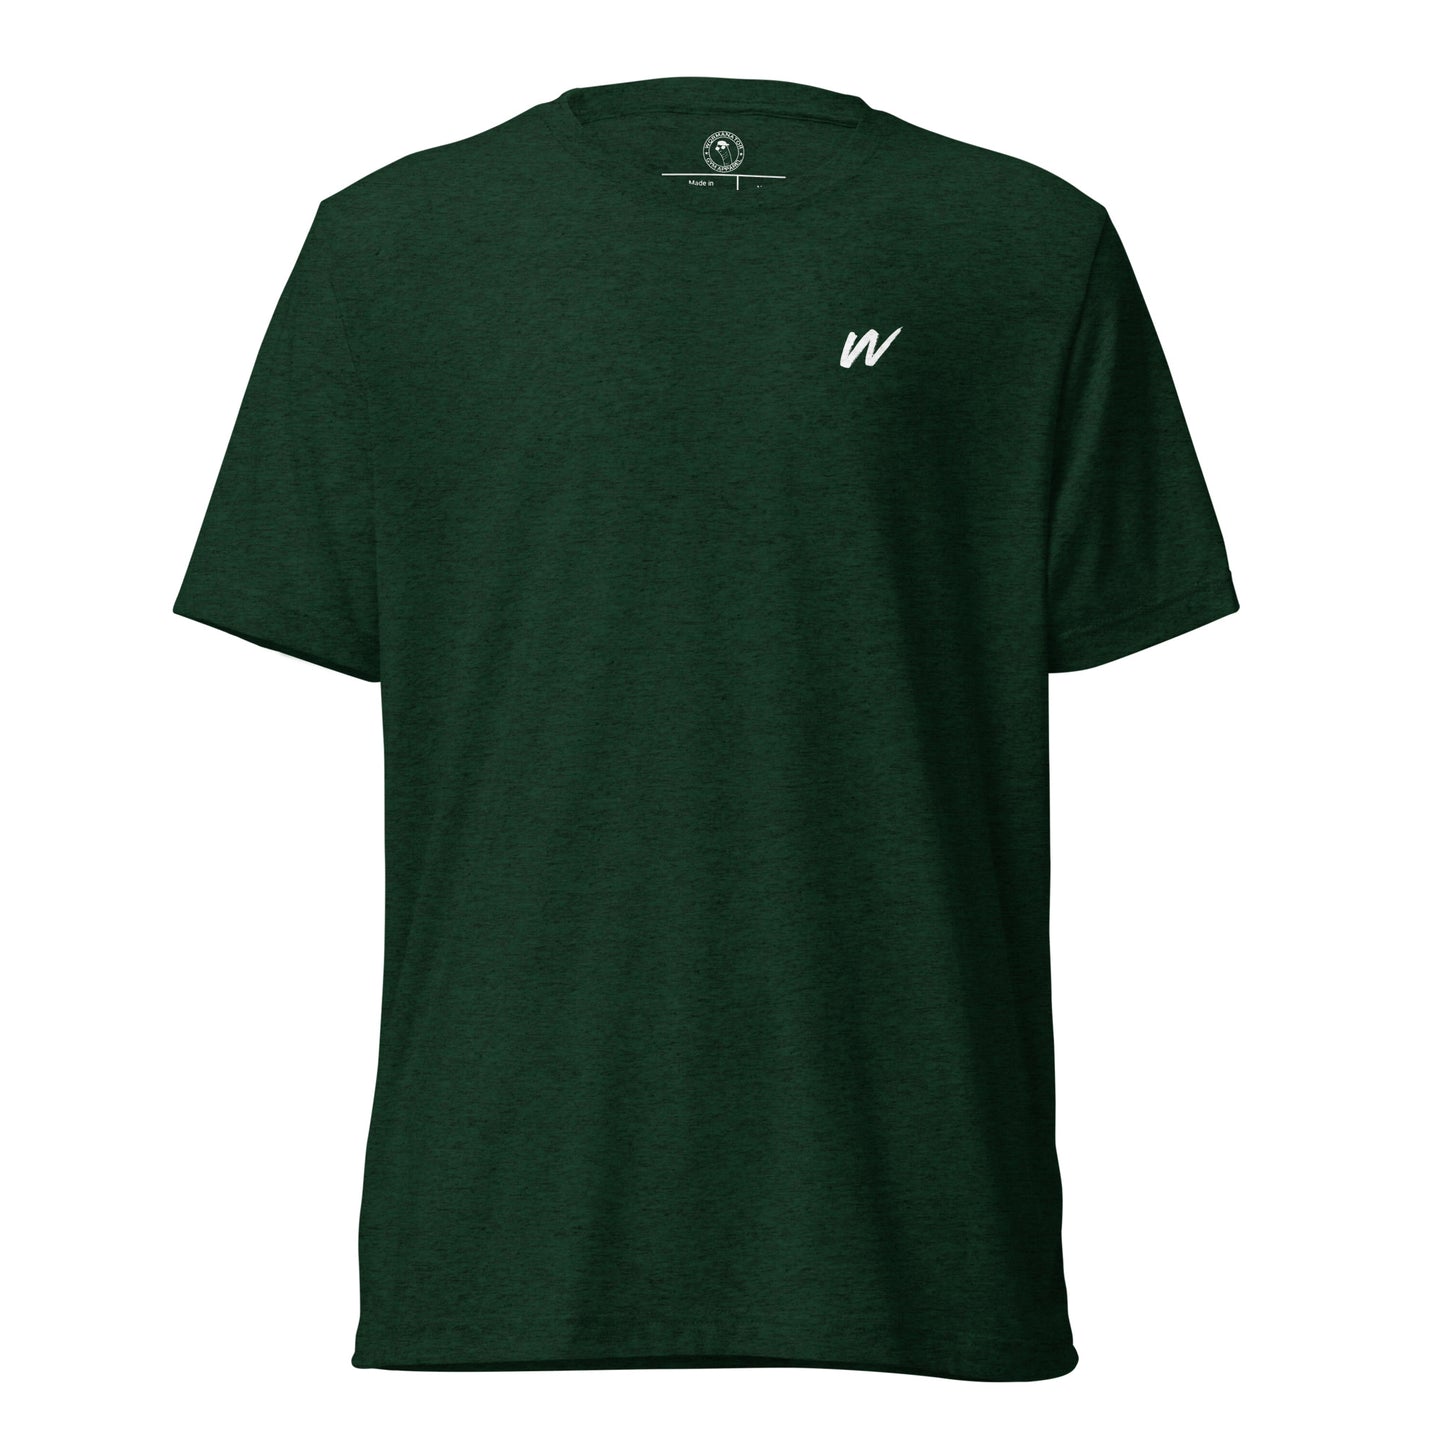 Win the Day T-Shirt in Emerald Triblend